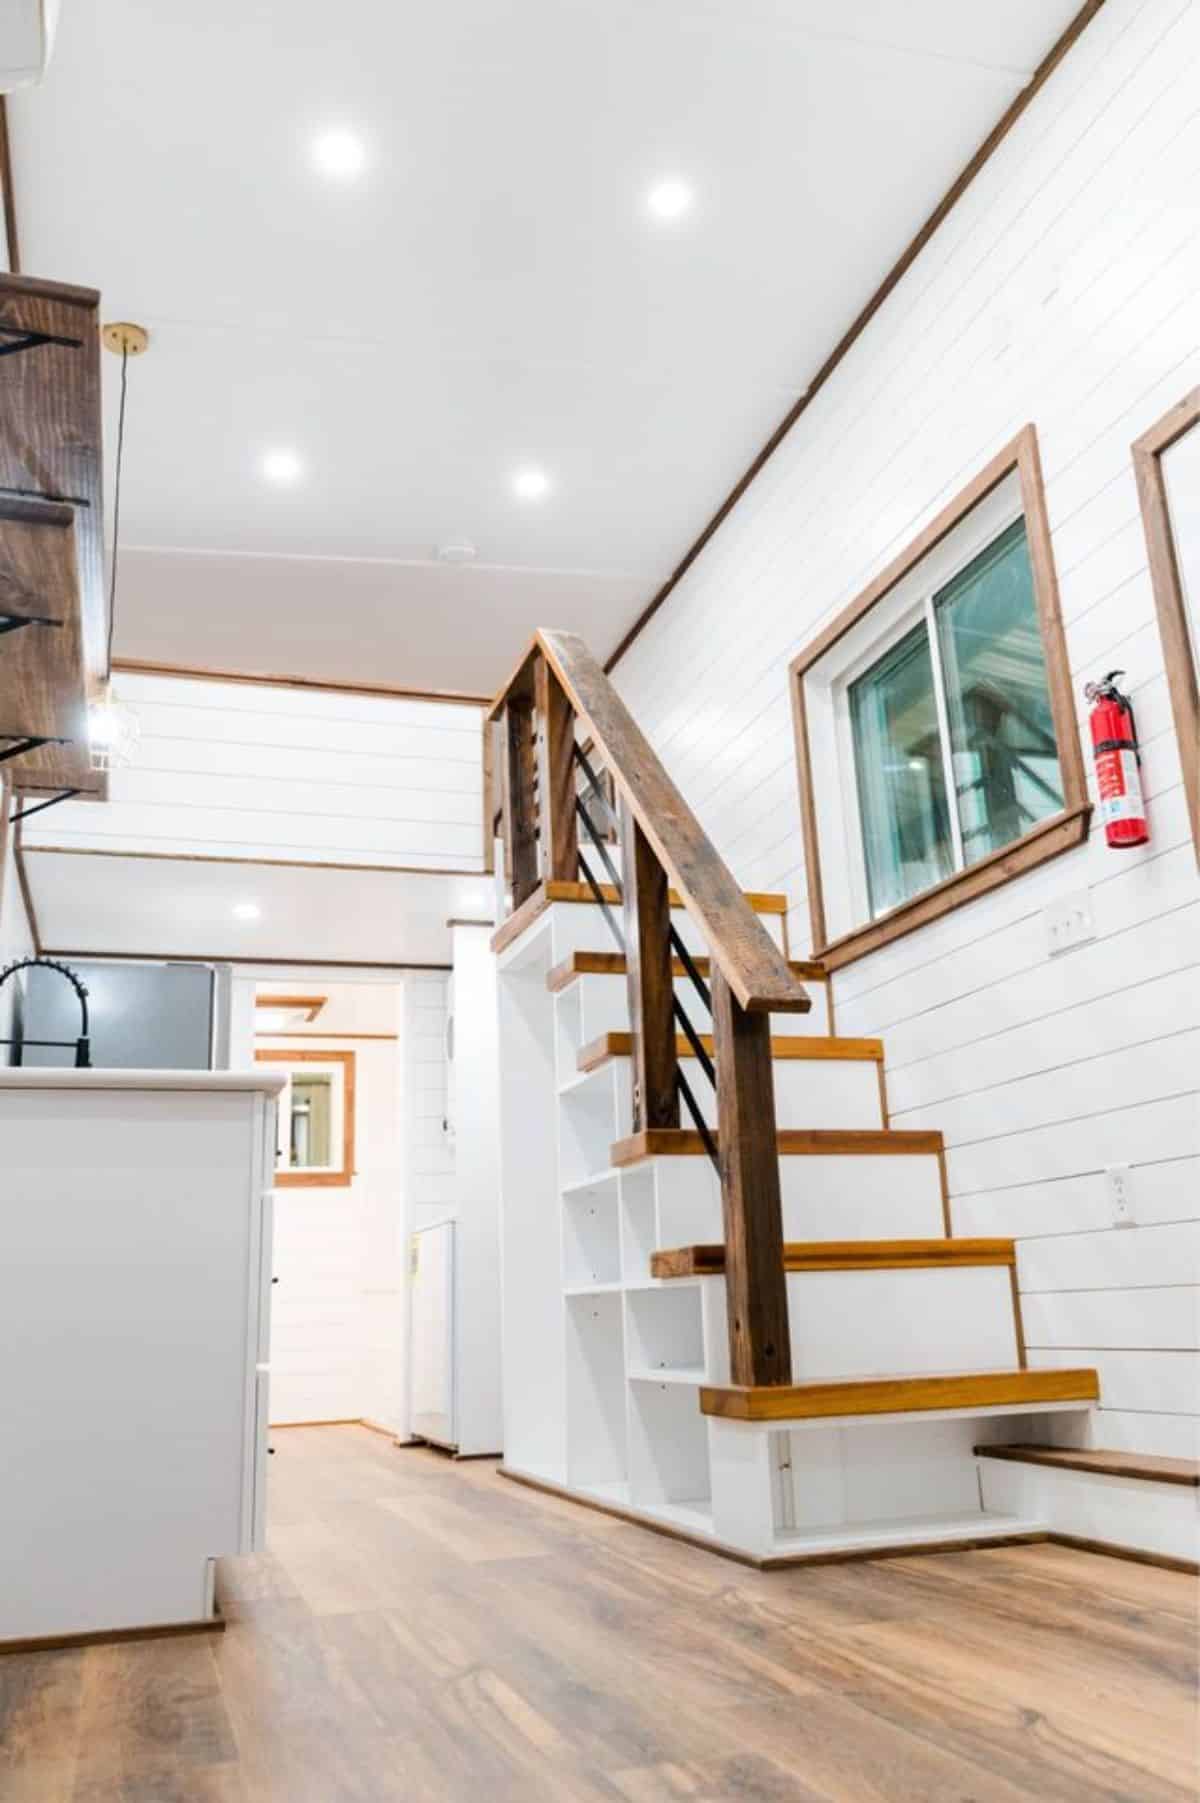 Big loft is accessible through the stairs